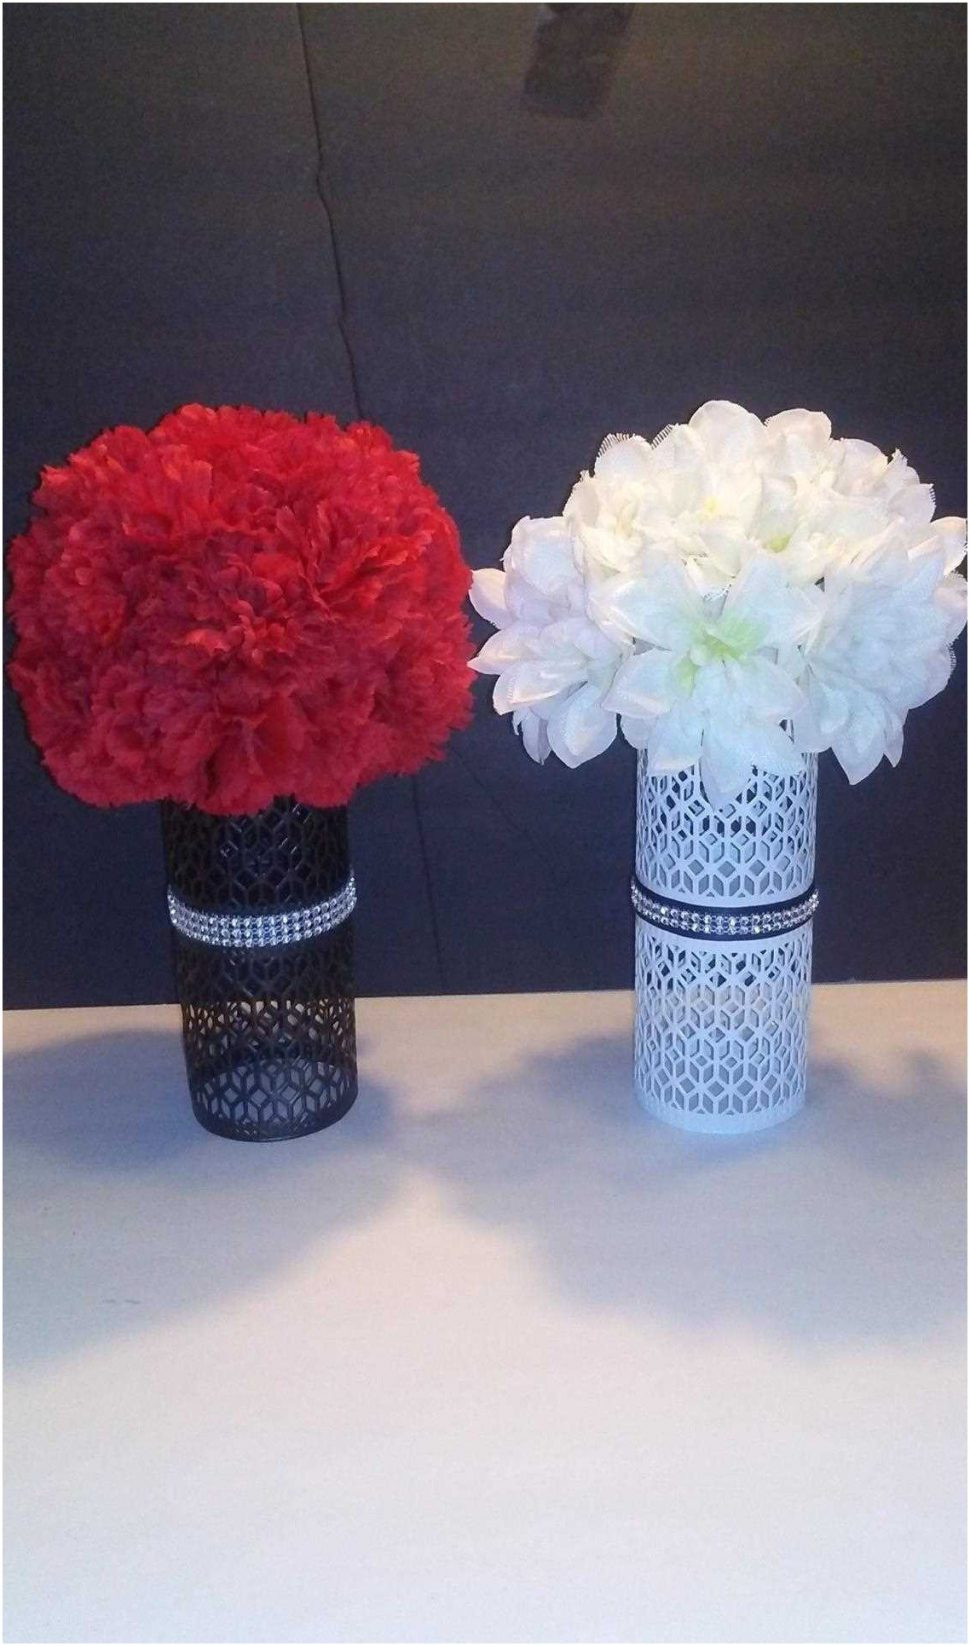 wedding vases for sale craigslist of 97 awesome sites for design inspiration other places and the o intended for blue silk flowers archaicawful dollar tree wedding decorations awesome h vases dollar vase i 0d 1138